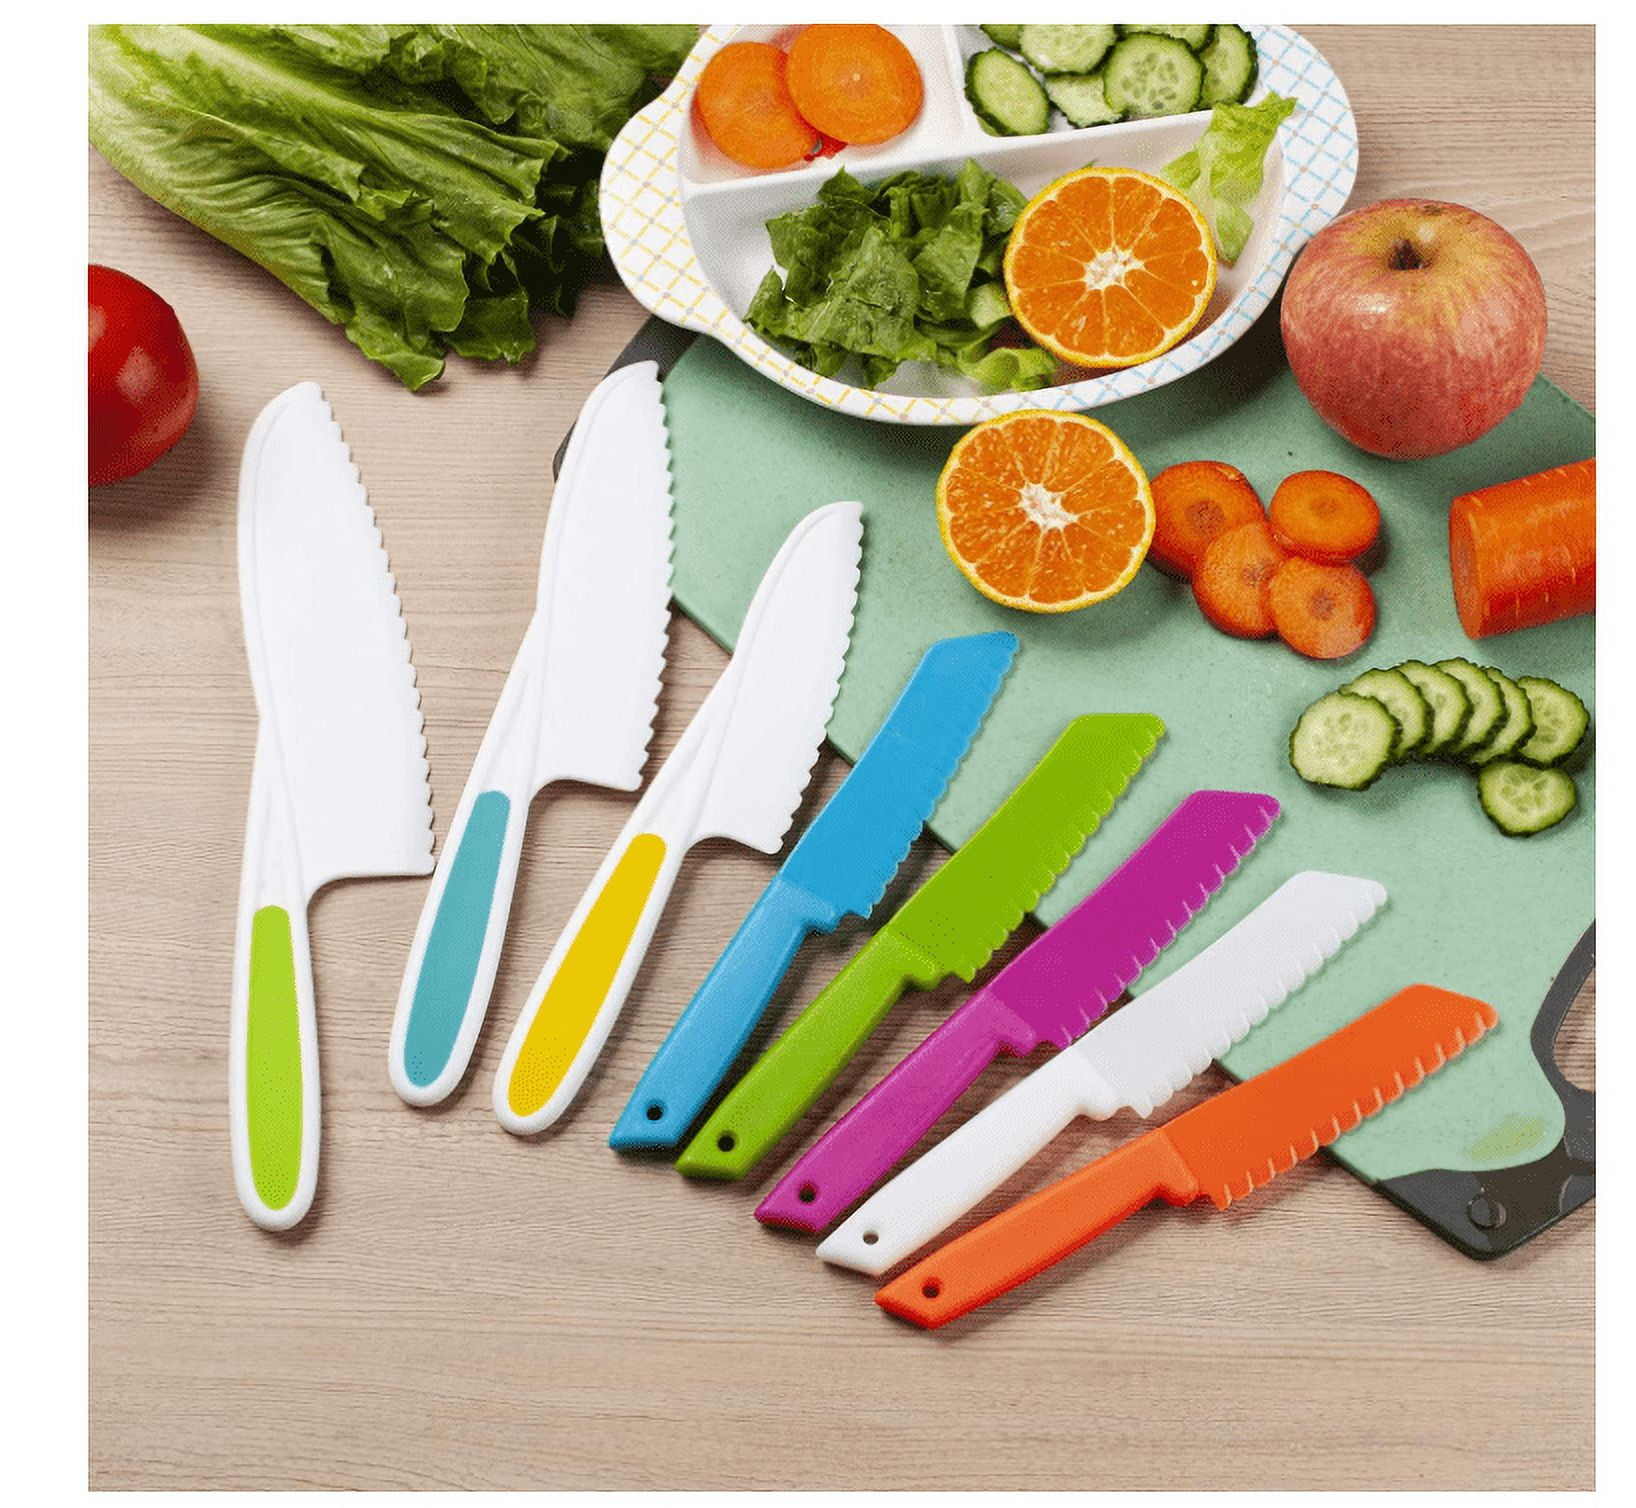 Nylon Chef Knife Children's Safe Cooking Knives for Cooking and Cutting Fruits, Veggies, Sandwiches & Cake - Perfect Starter Knife Set for Little